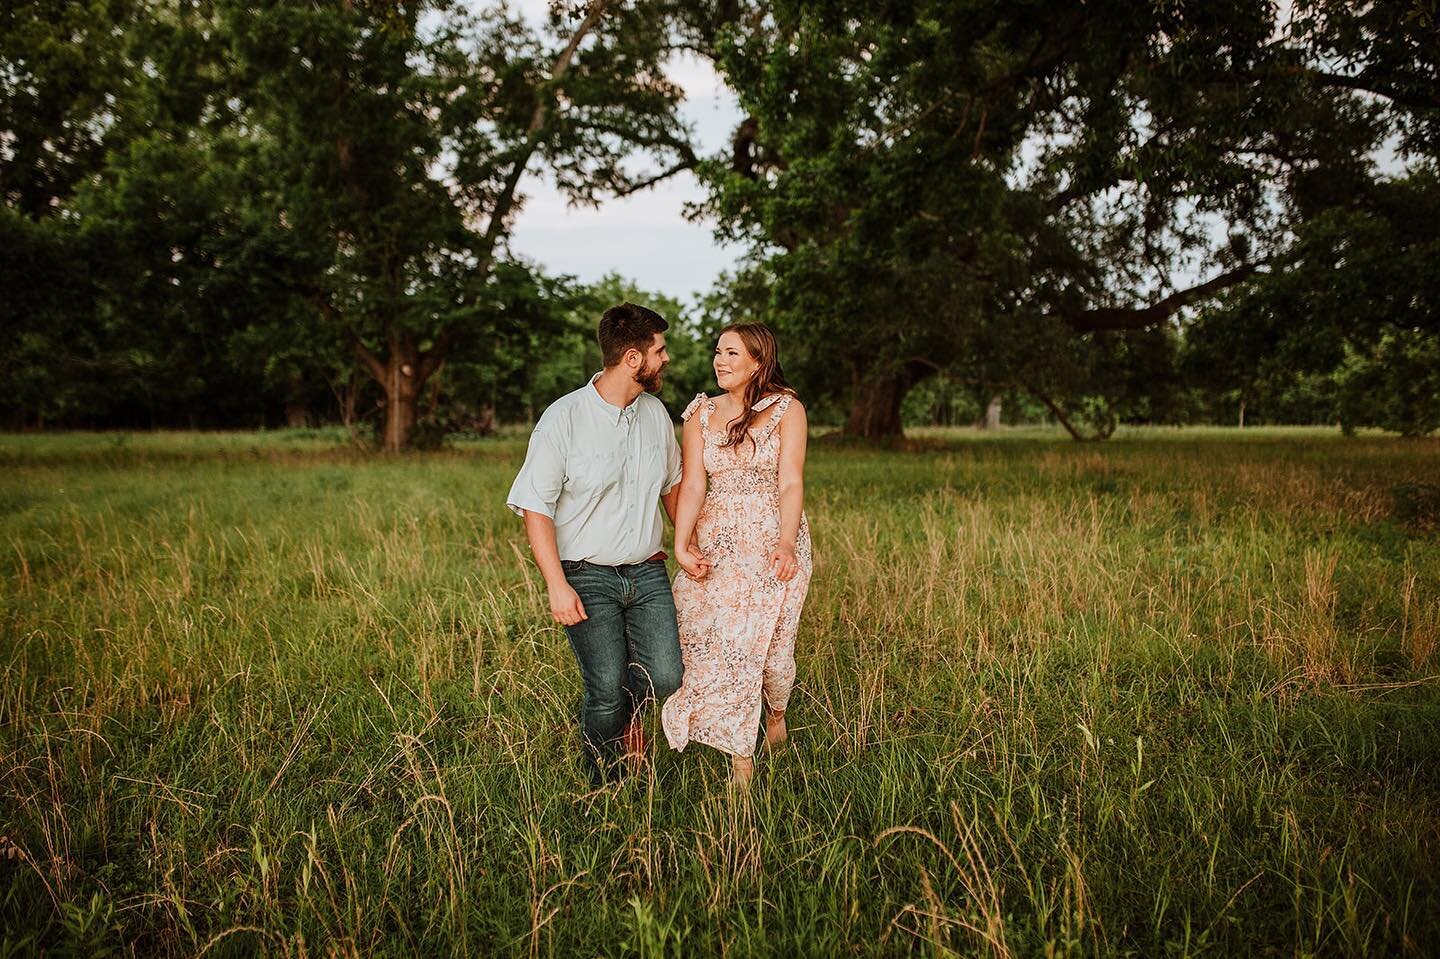 Happy wedding day to Tristin and Natalie! Thank goodness we get a break from the rain again today! Can&rsquo;t wait to watch y&rsquo;all dance the night away ❤️

@natalie_duhon_ 
@goldenhouseent